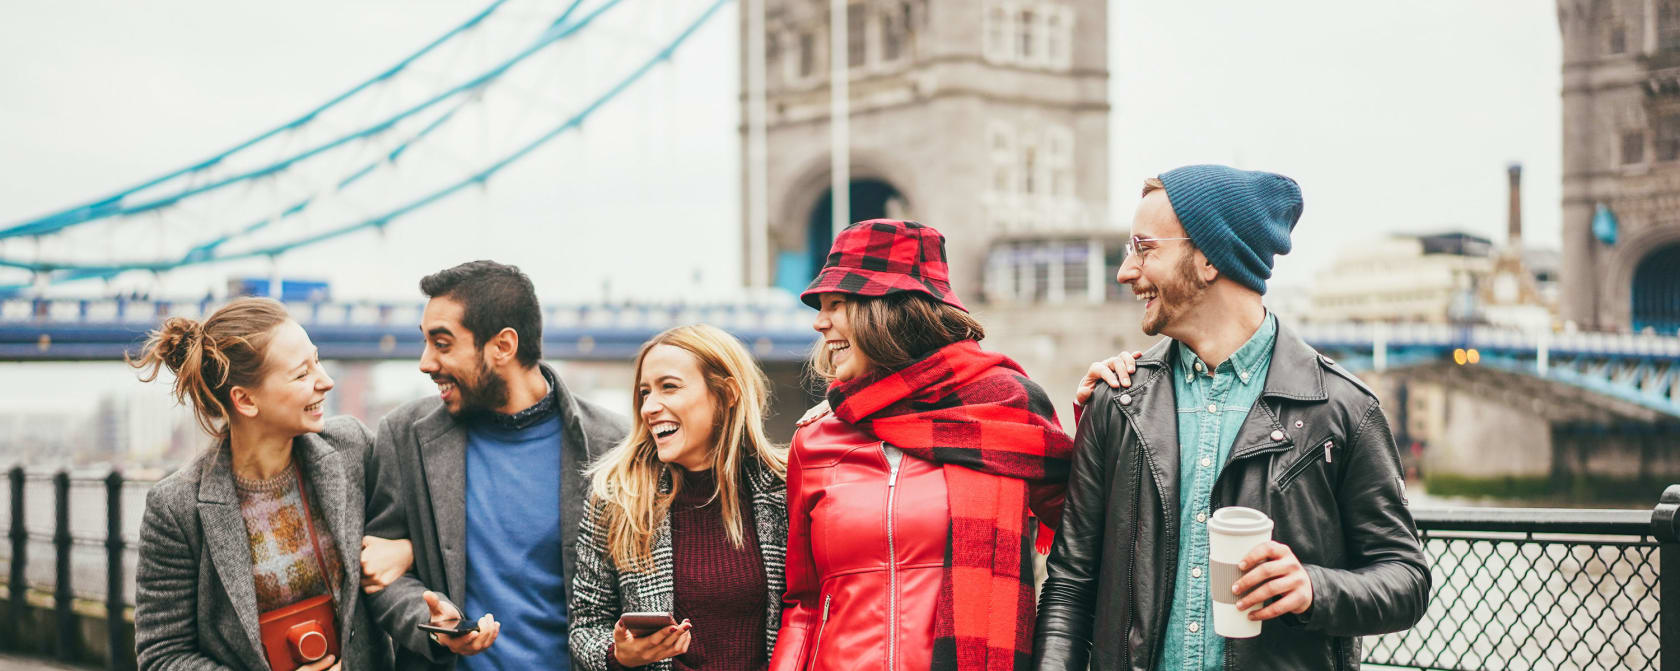 Group of students standing in front of the Tower Bridge in London, England.